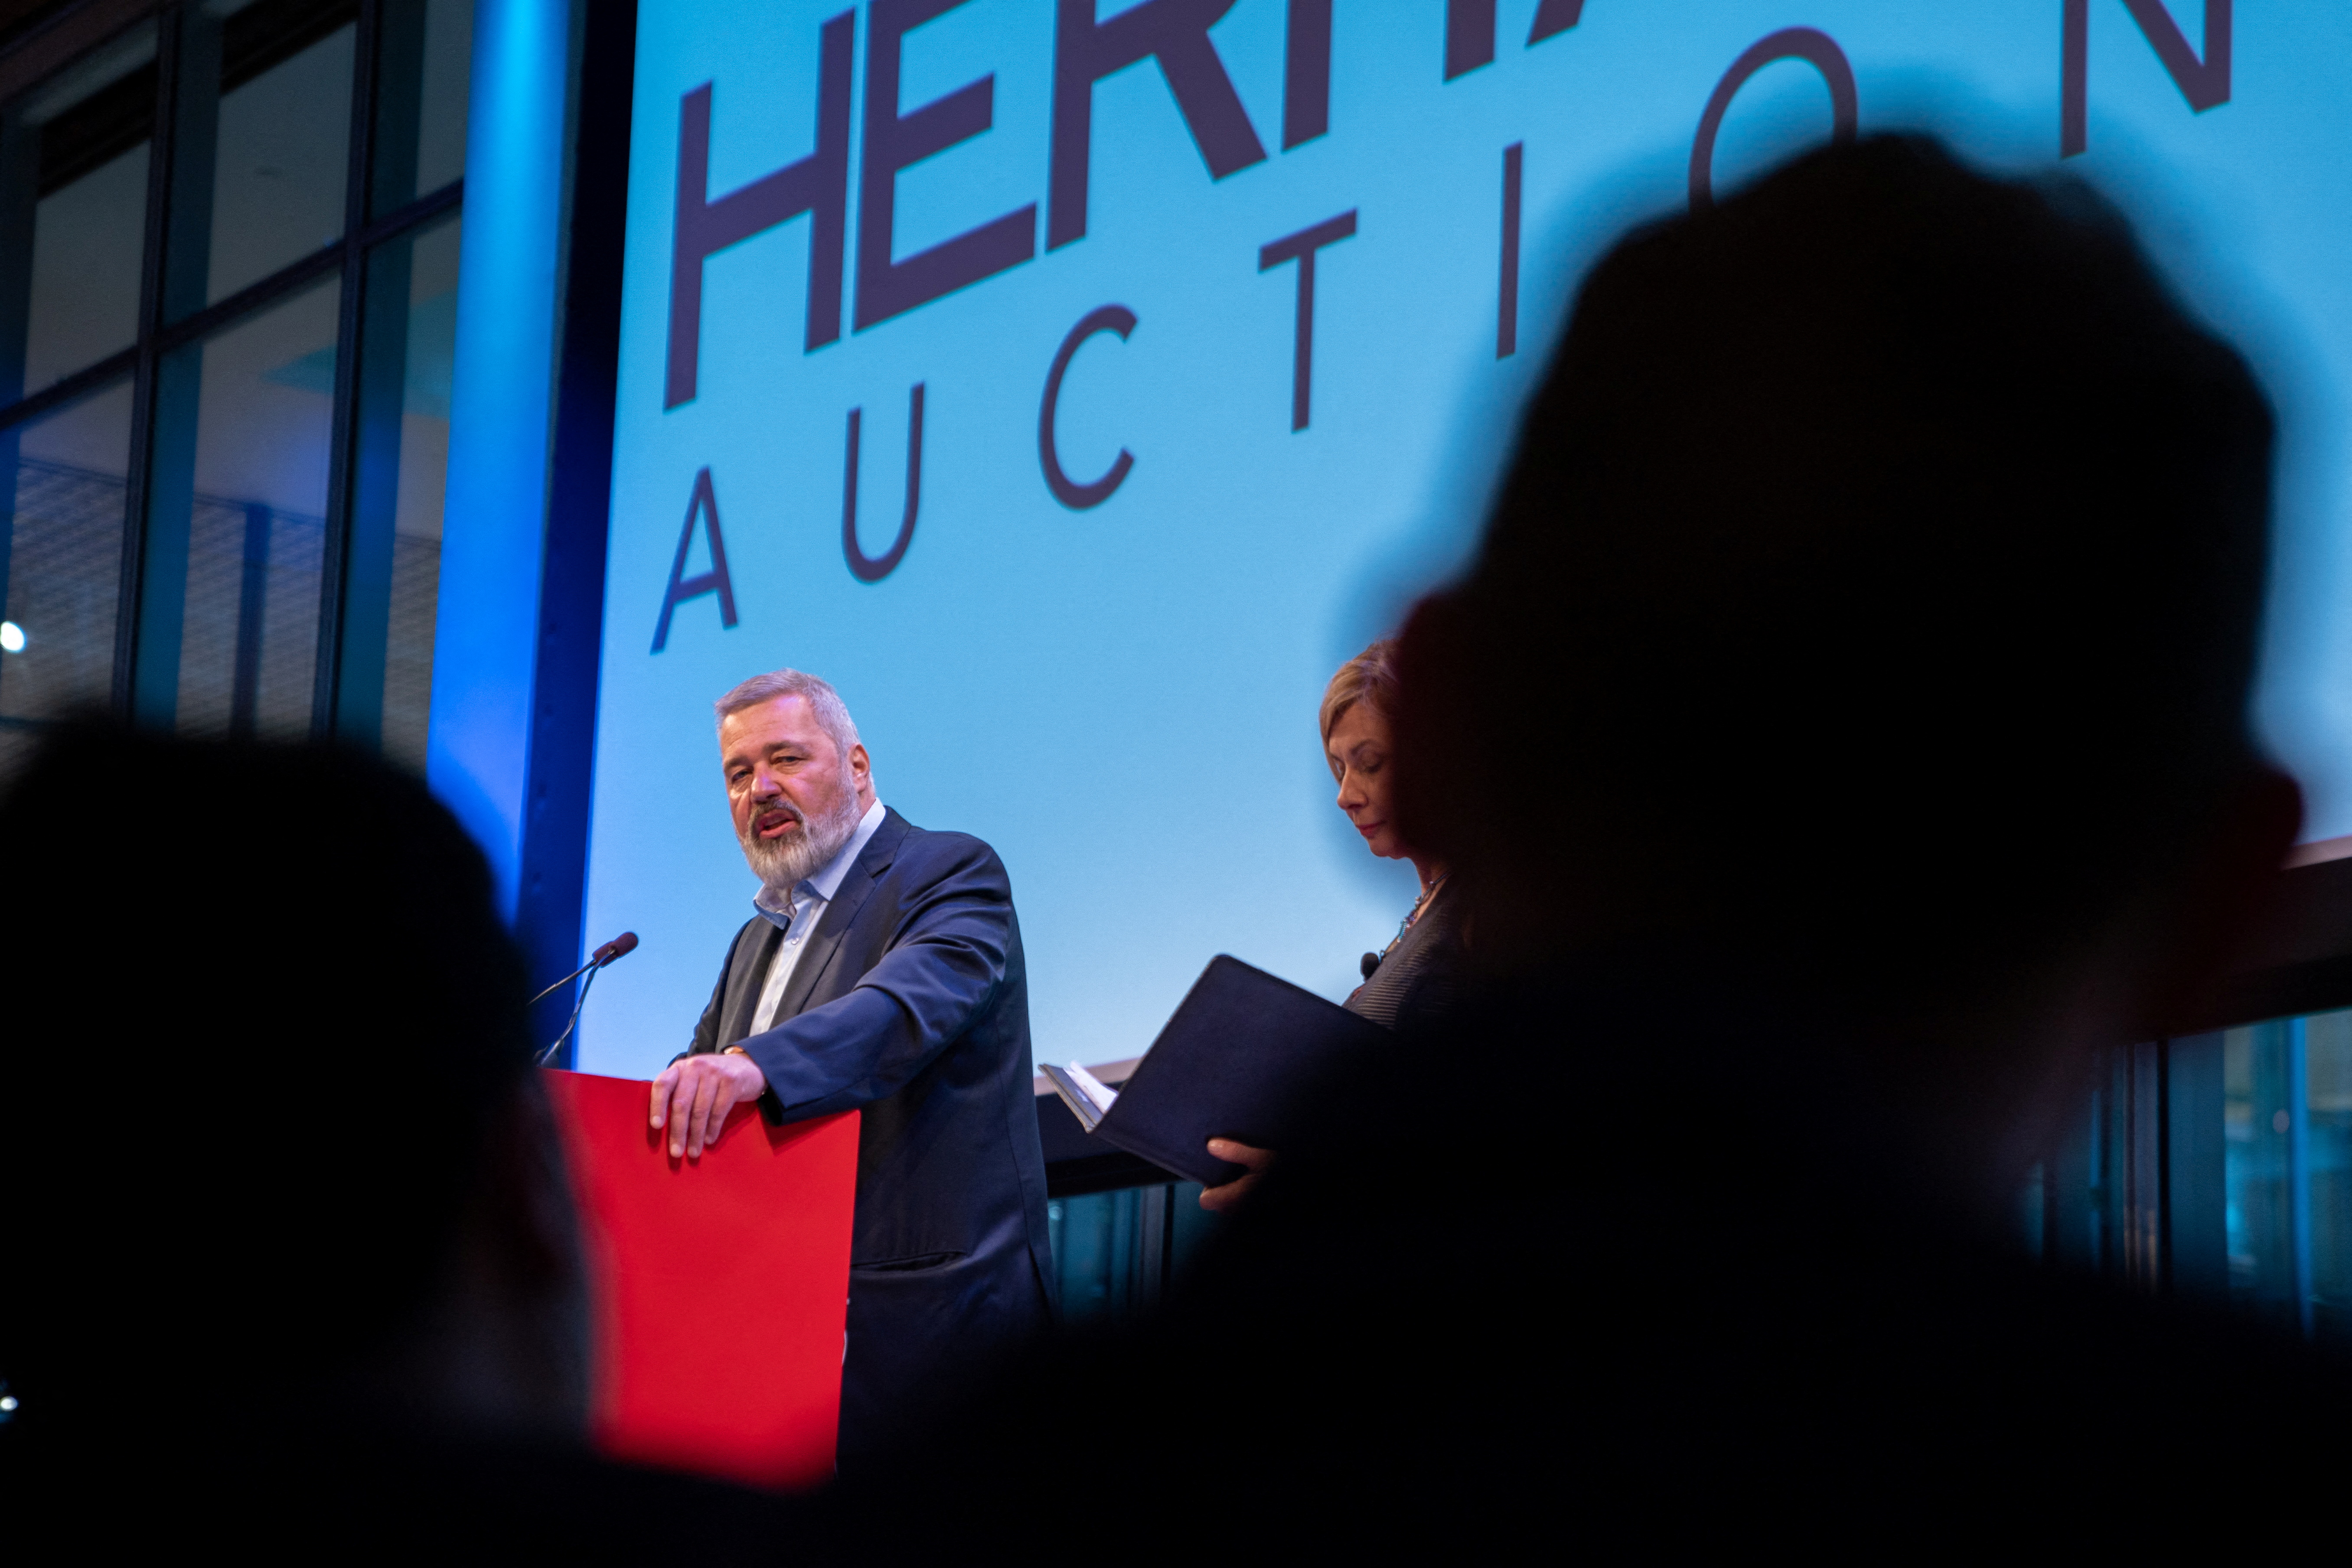 Dmitry Muratov speaks during the auction of his 2021 Nobel Peace Prize medal by Heritage Auctions